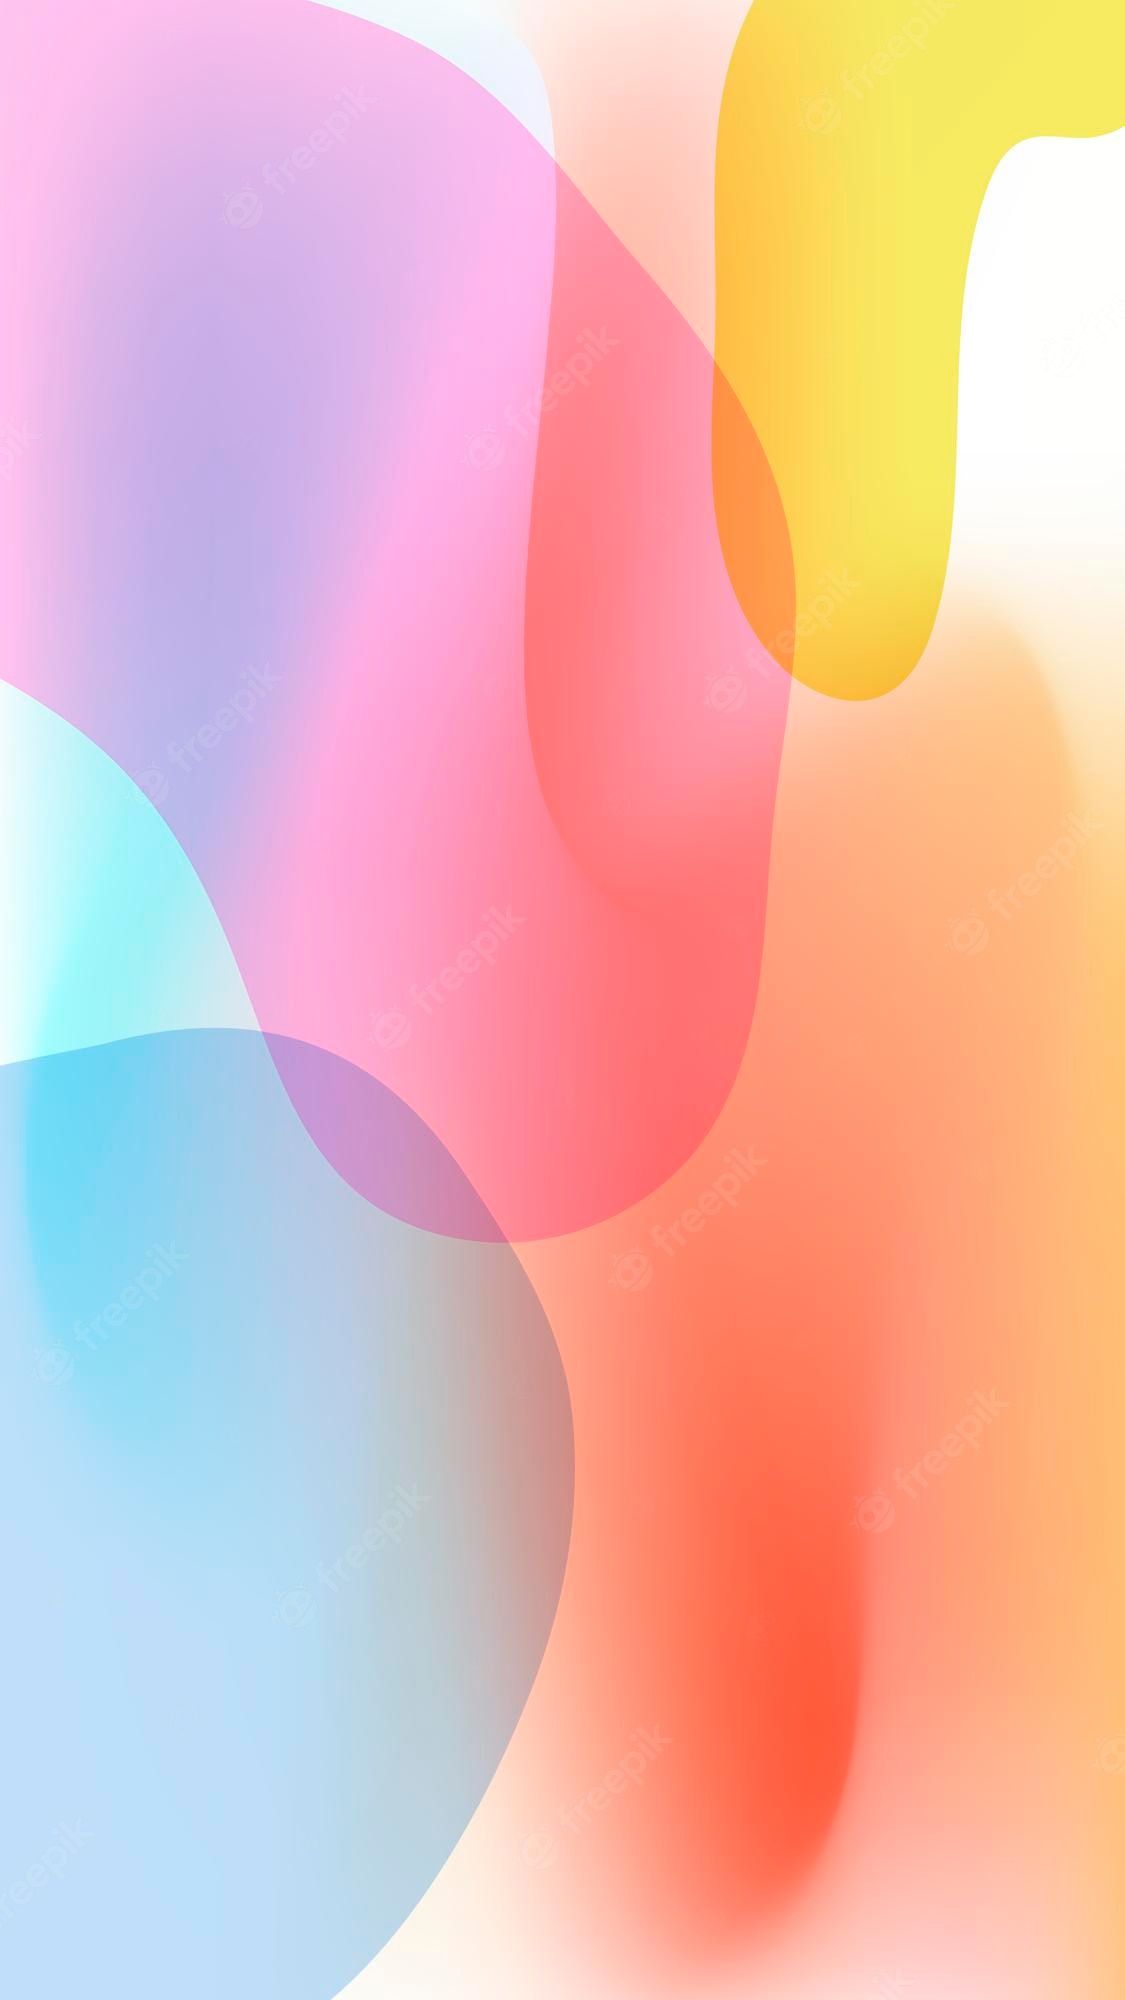 Free Vector. Aesthetic mobile wallpaper background vector, abstract design